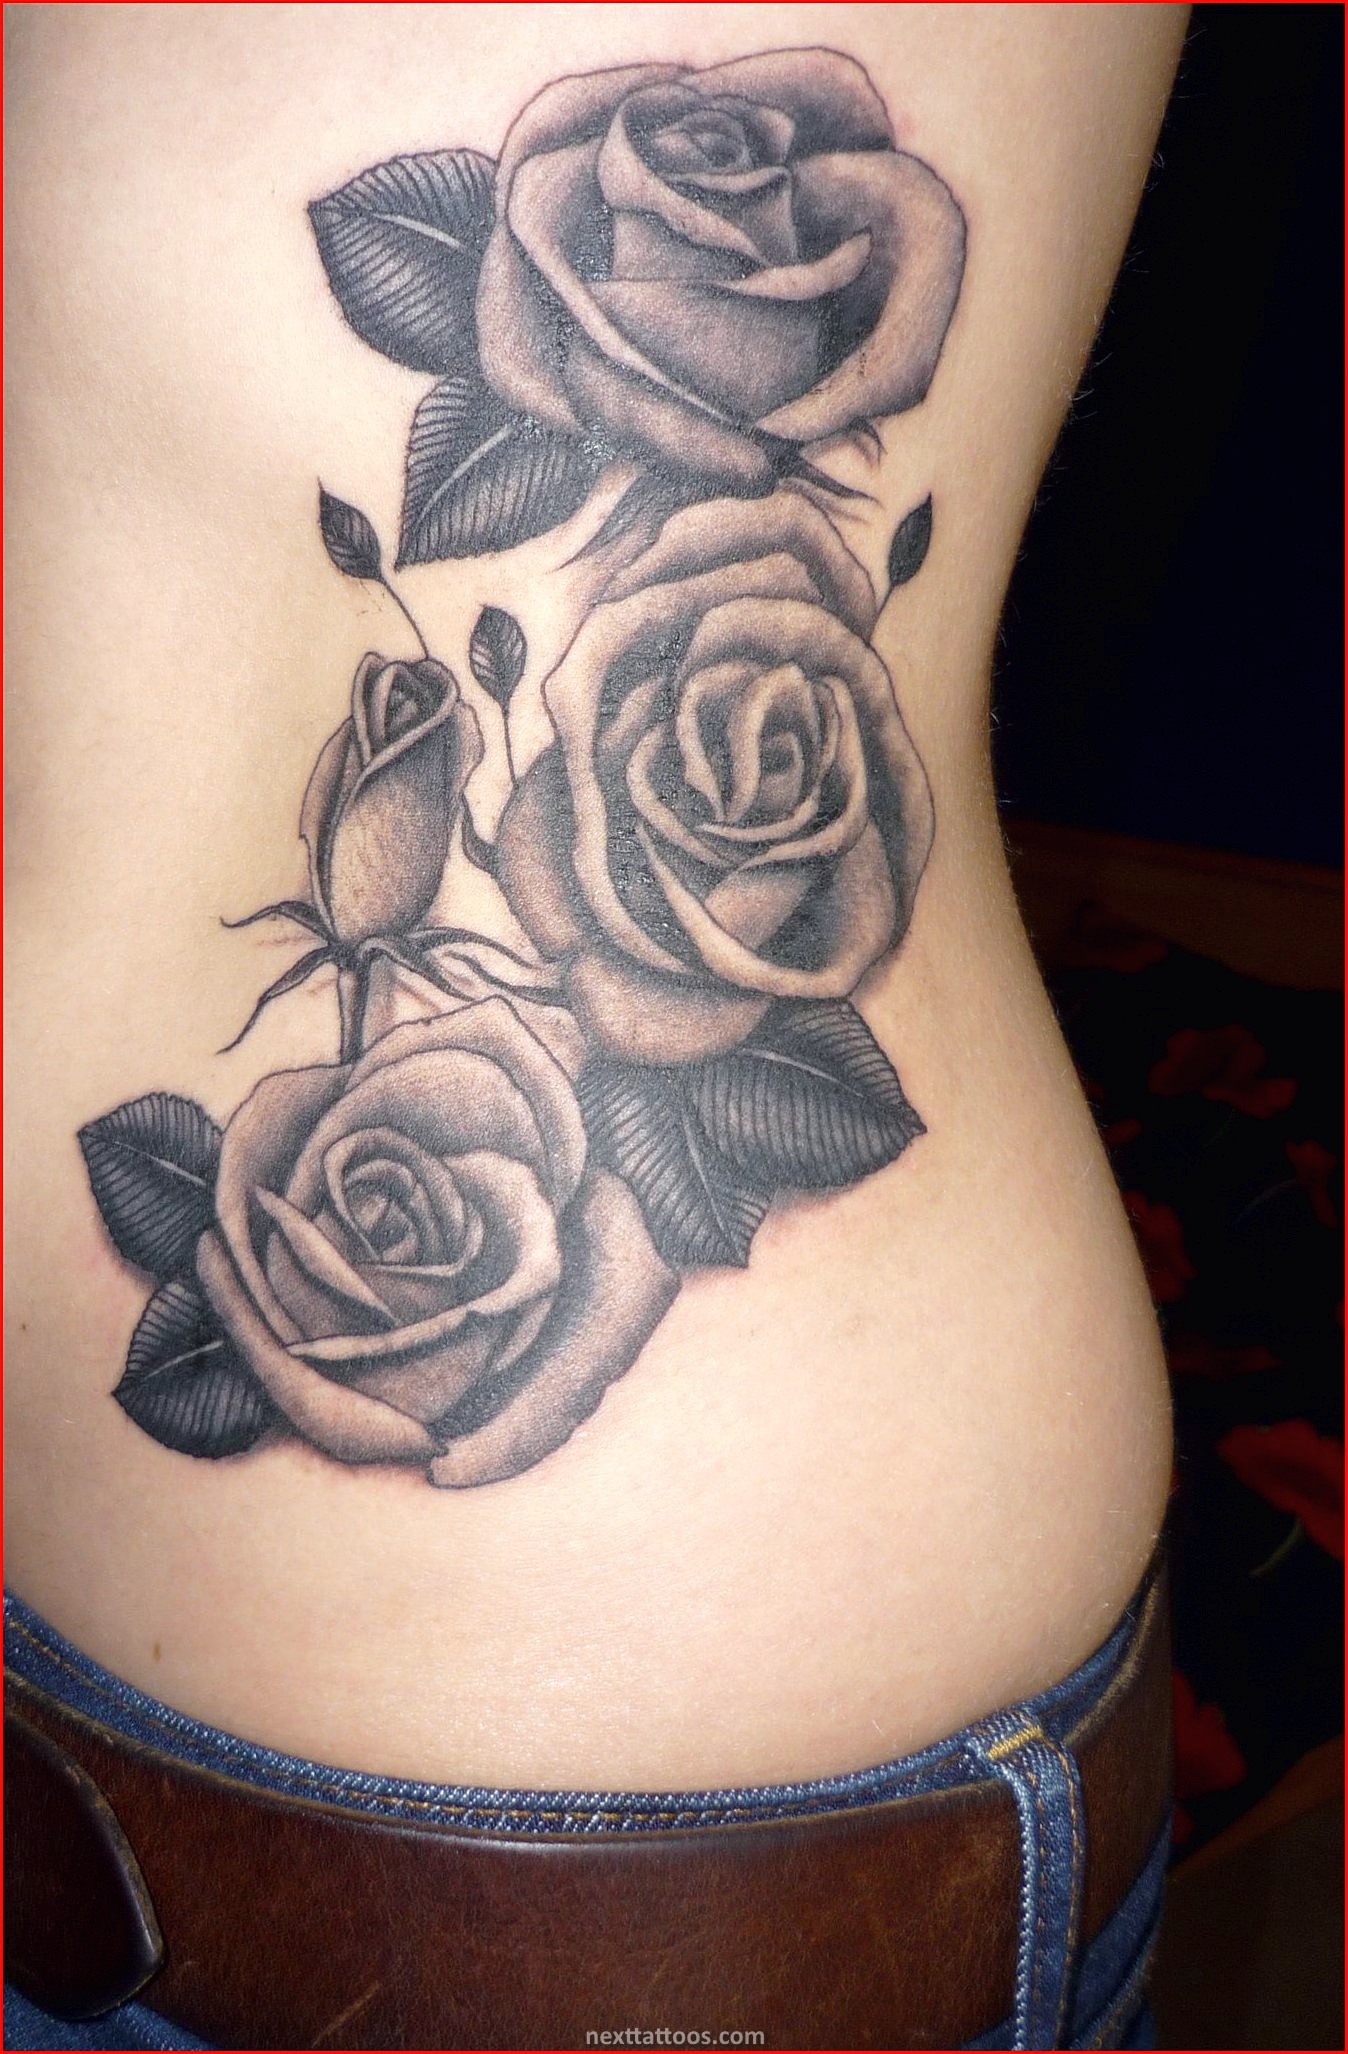 Rose Tattoo on the Arm